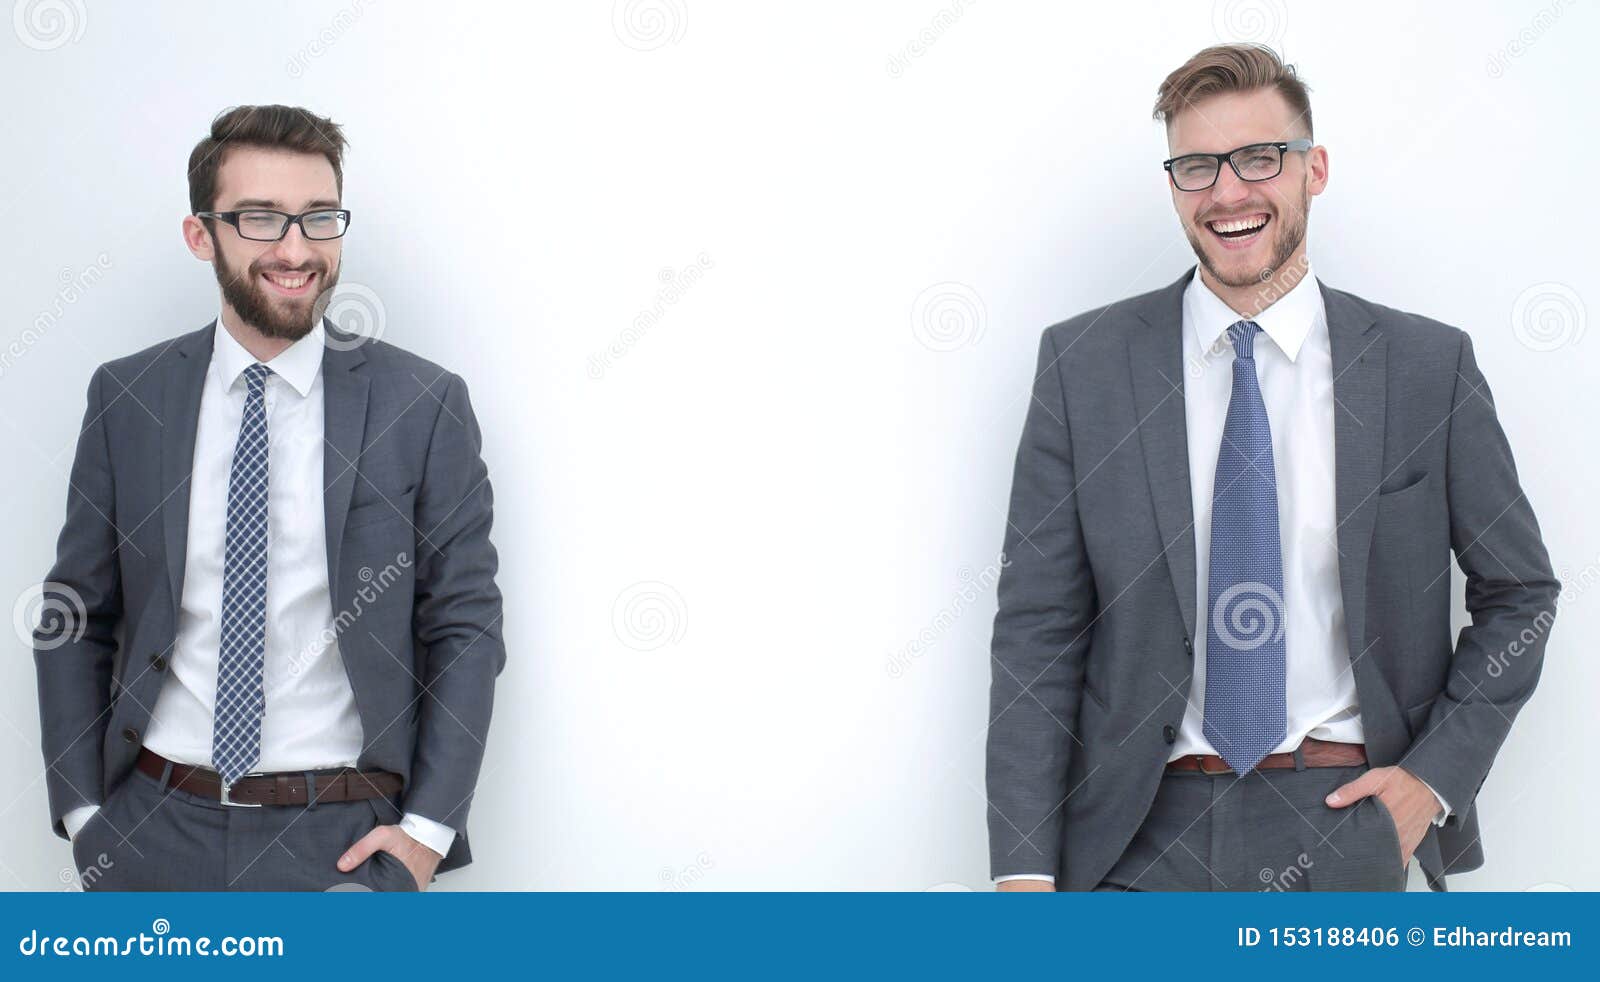 Two Smiling Businessmen Isolated in the Light Stock Photo - Image of ...